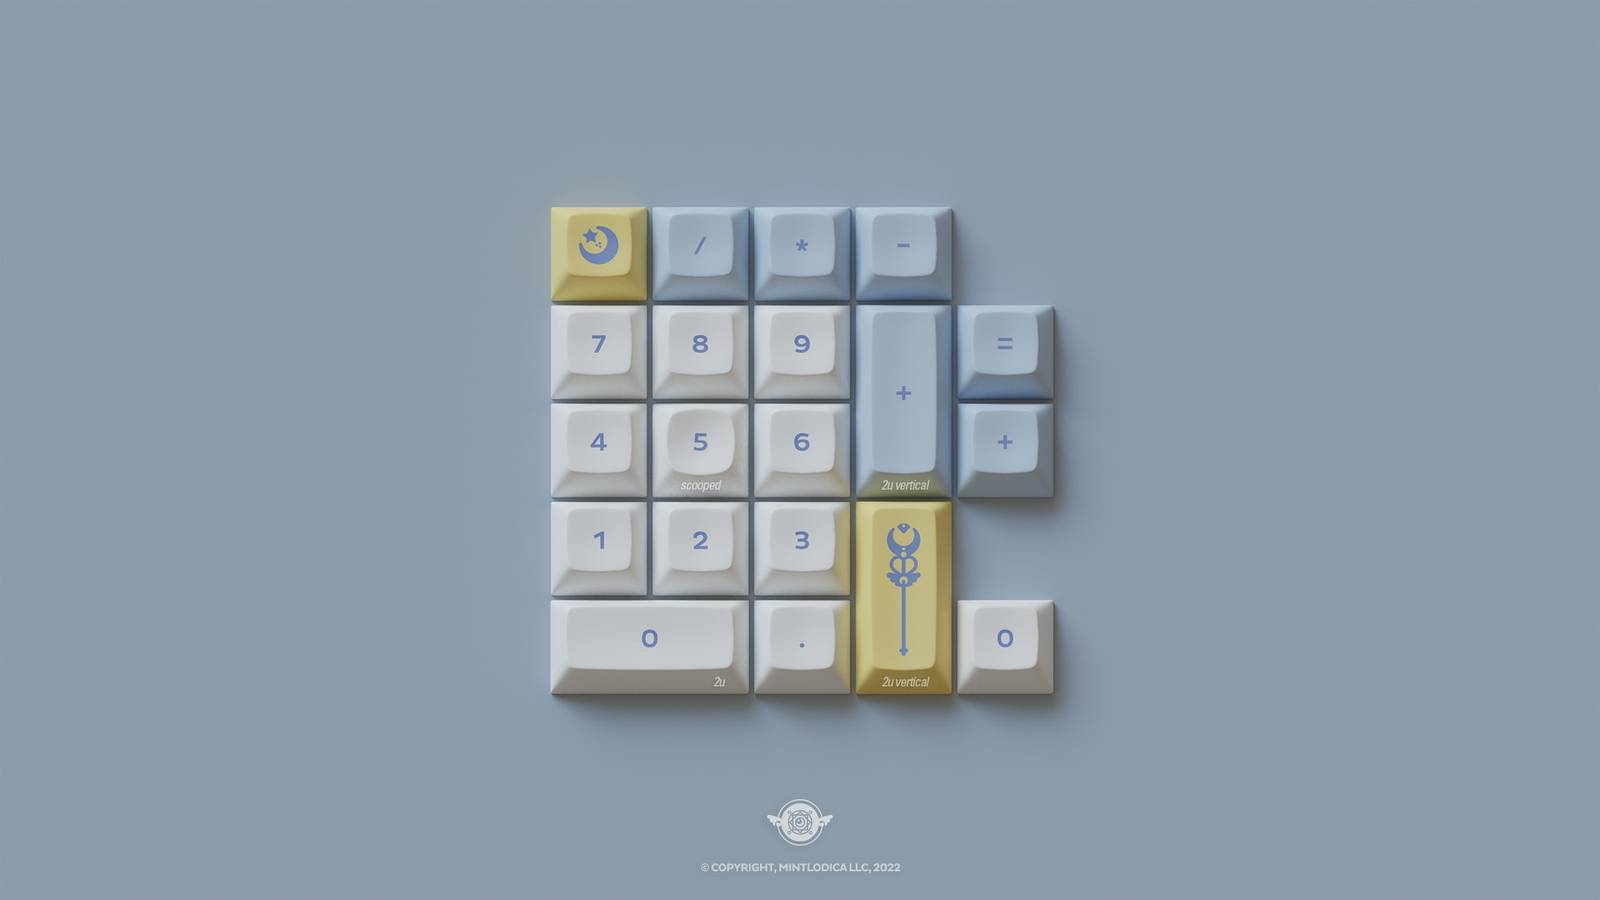 DSA Magic Girl keycaps by Mintlodica in Millennium (White, Blue, Yellow) featuring cute anime shoujo 1990s manga themed. Numpad kit to add to Base Kit for Full Size Compatibility.